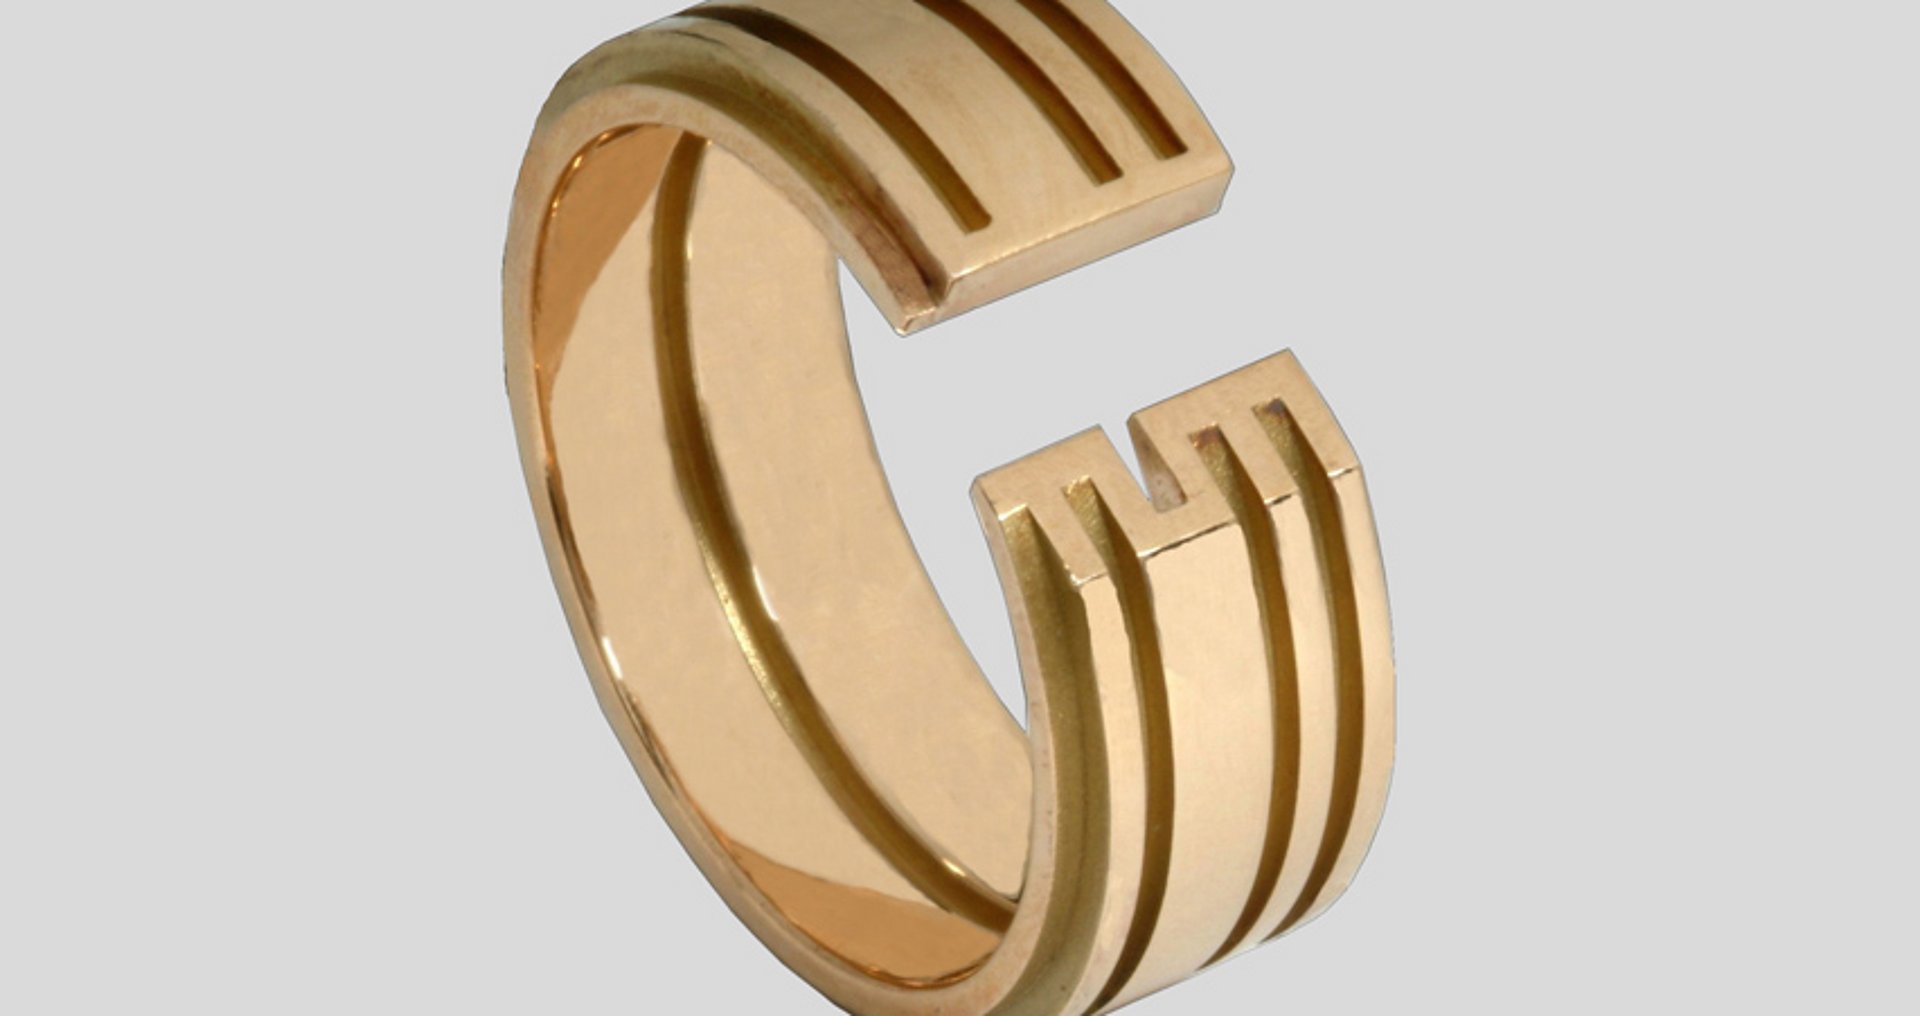 The Golden Ring of Honor of the TUM